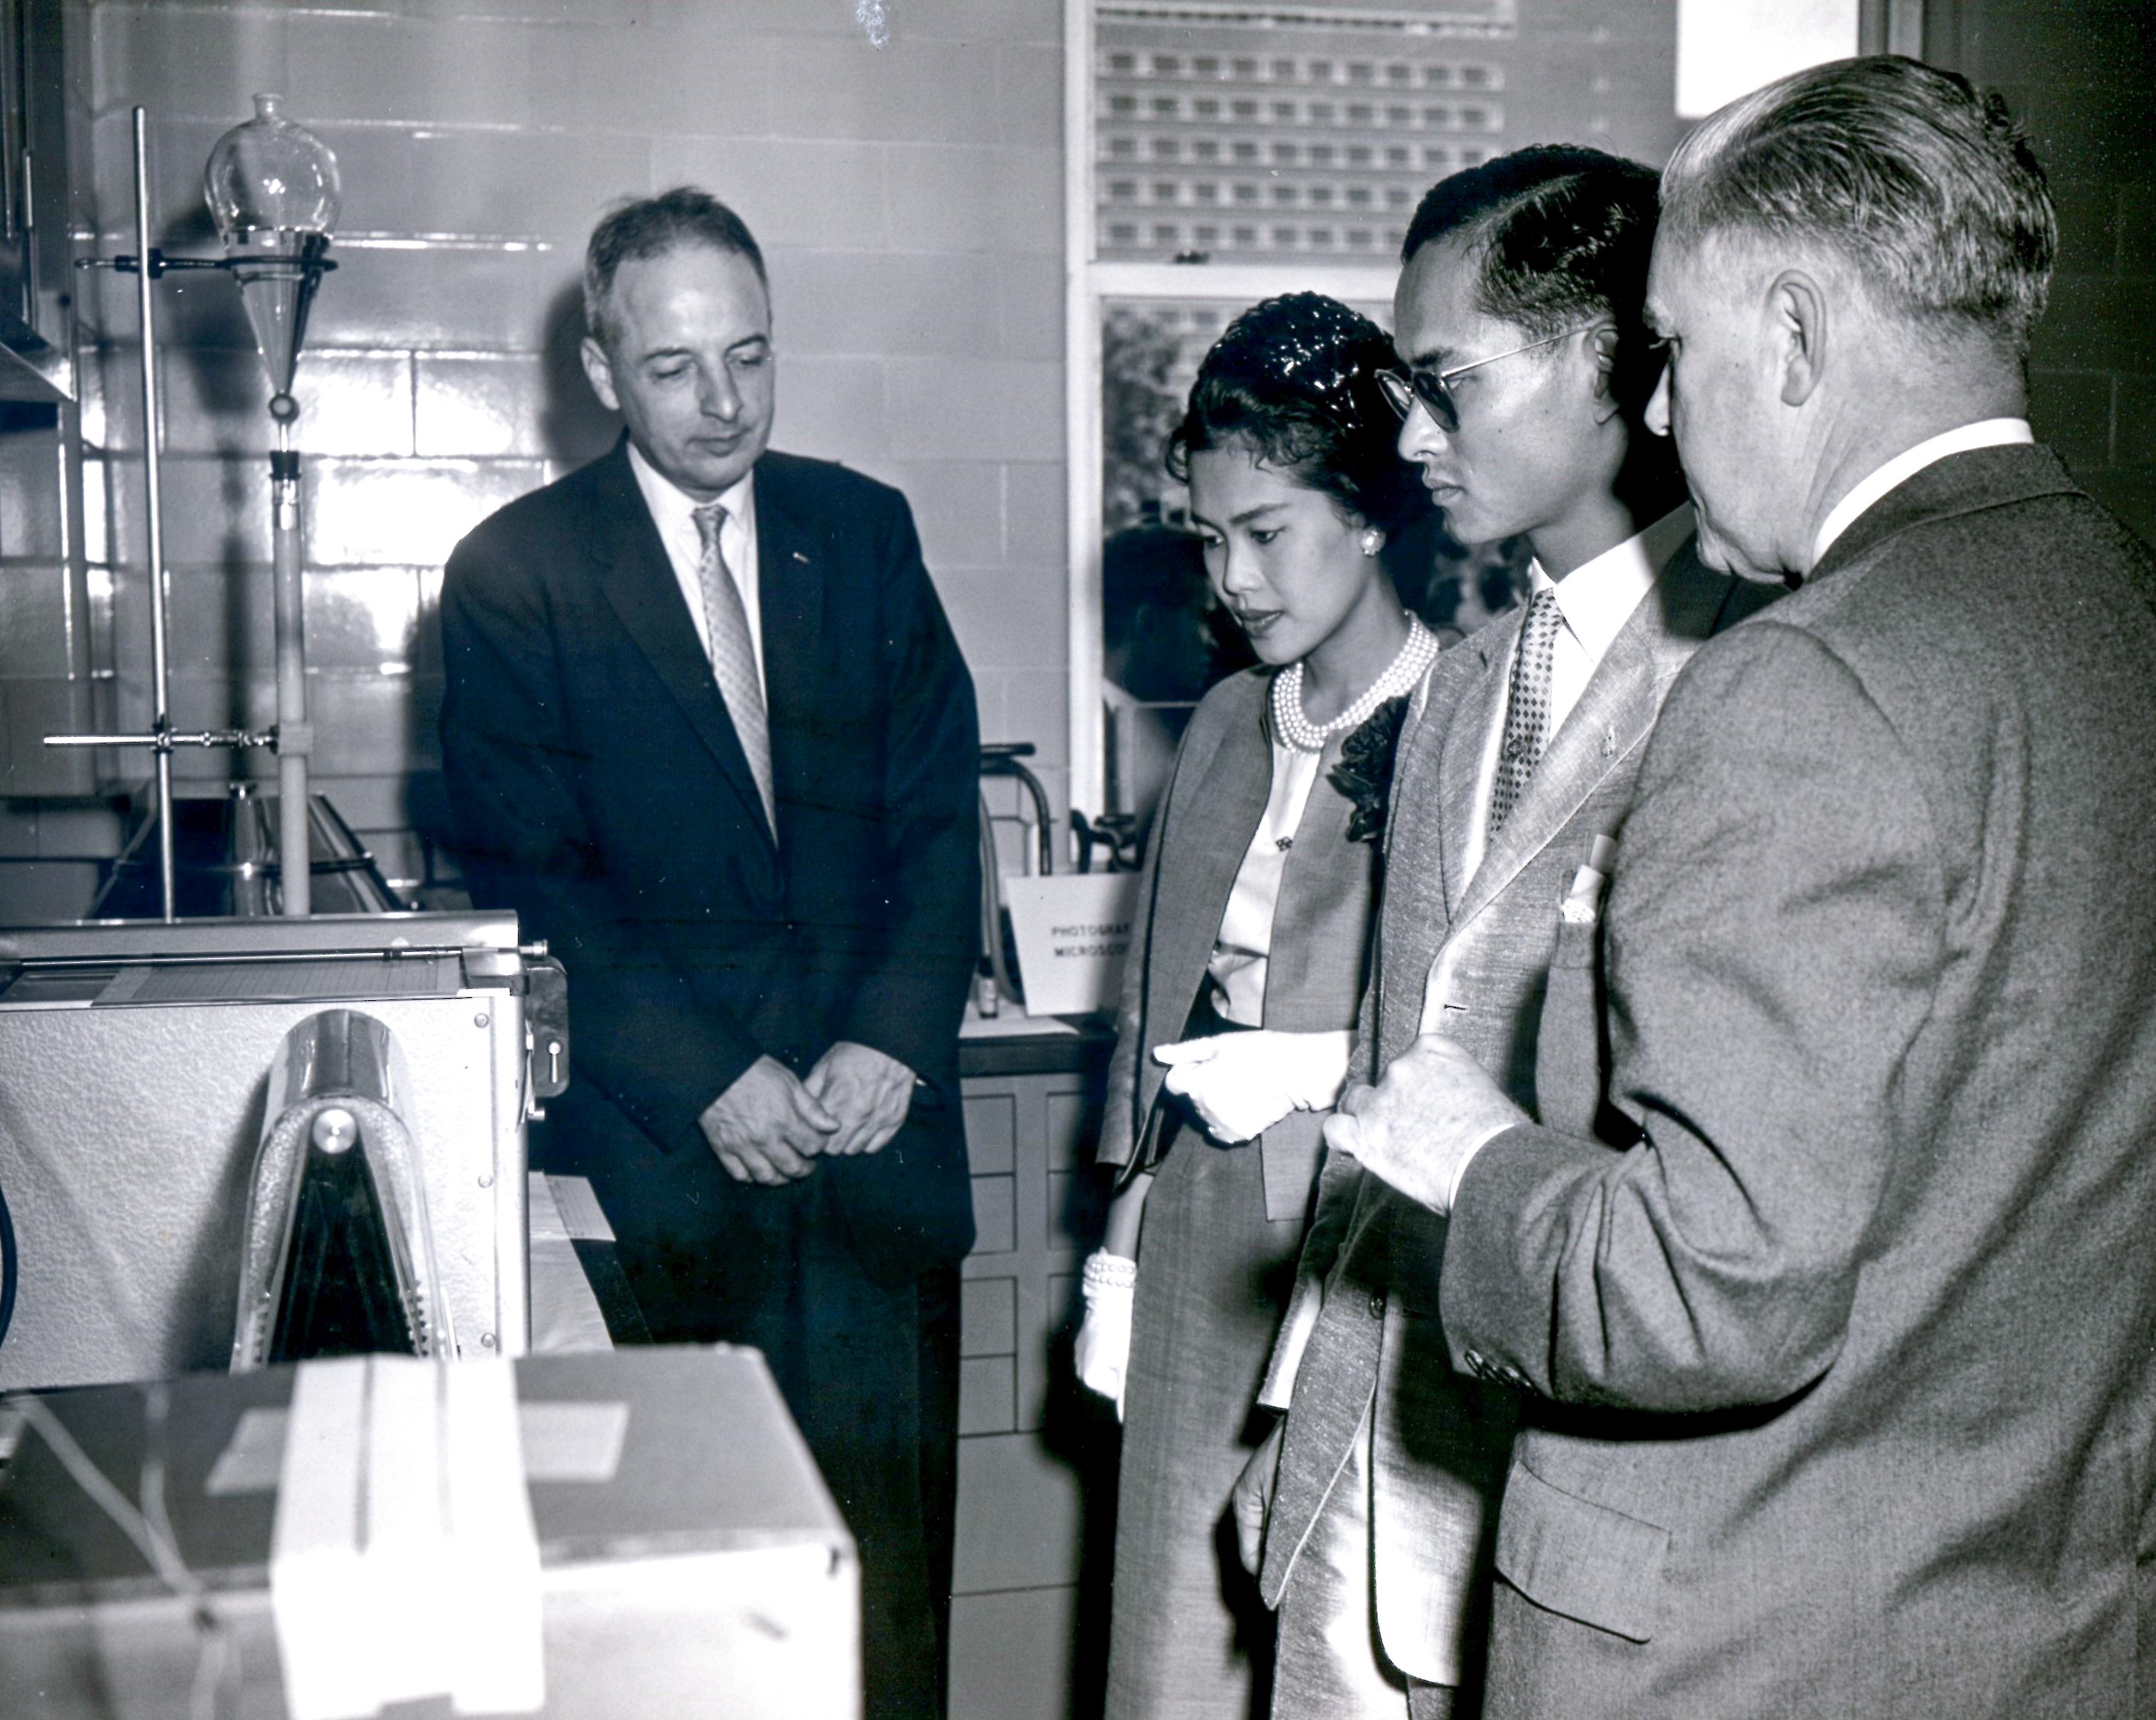 The King of Thailand touring Laboratories in Building 29 with VIPs